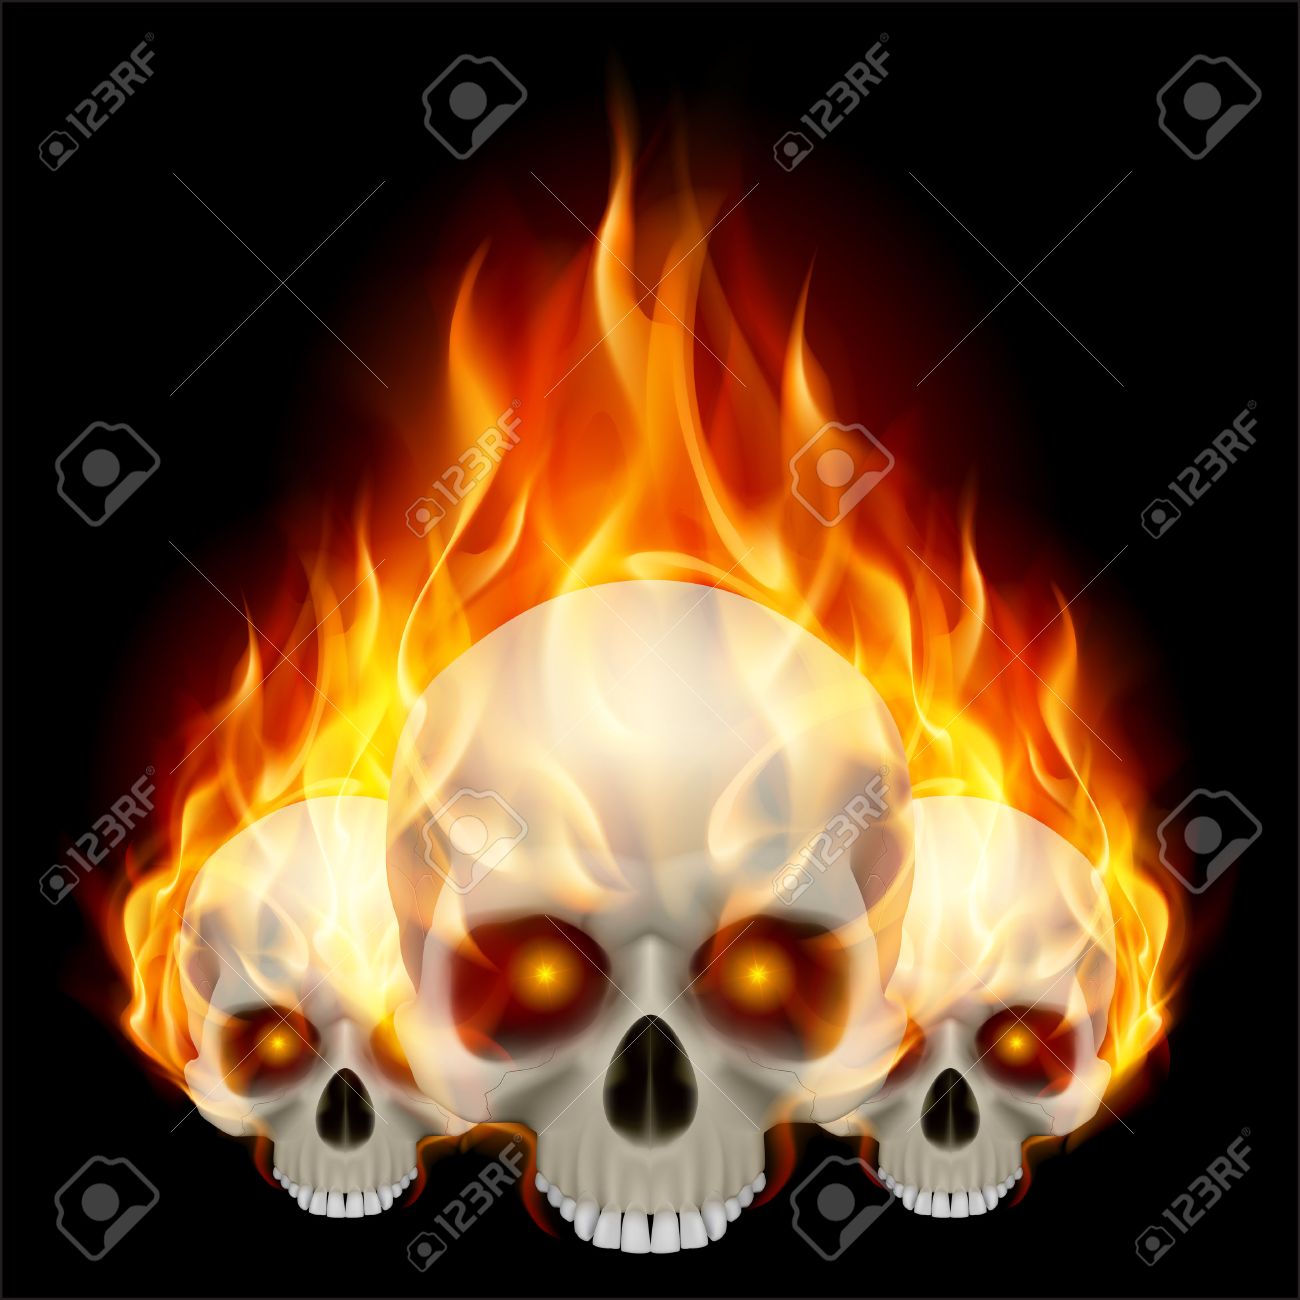 Three Flaming Skulls With Fiery Eyes On Black Background Royalty